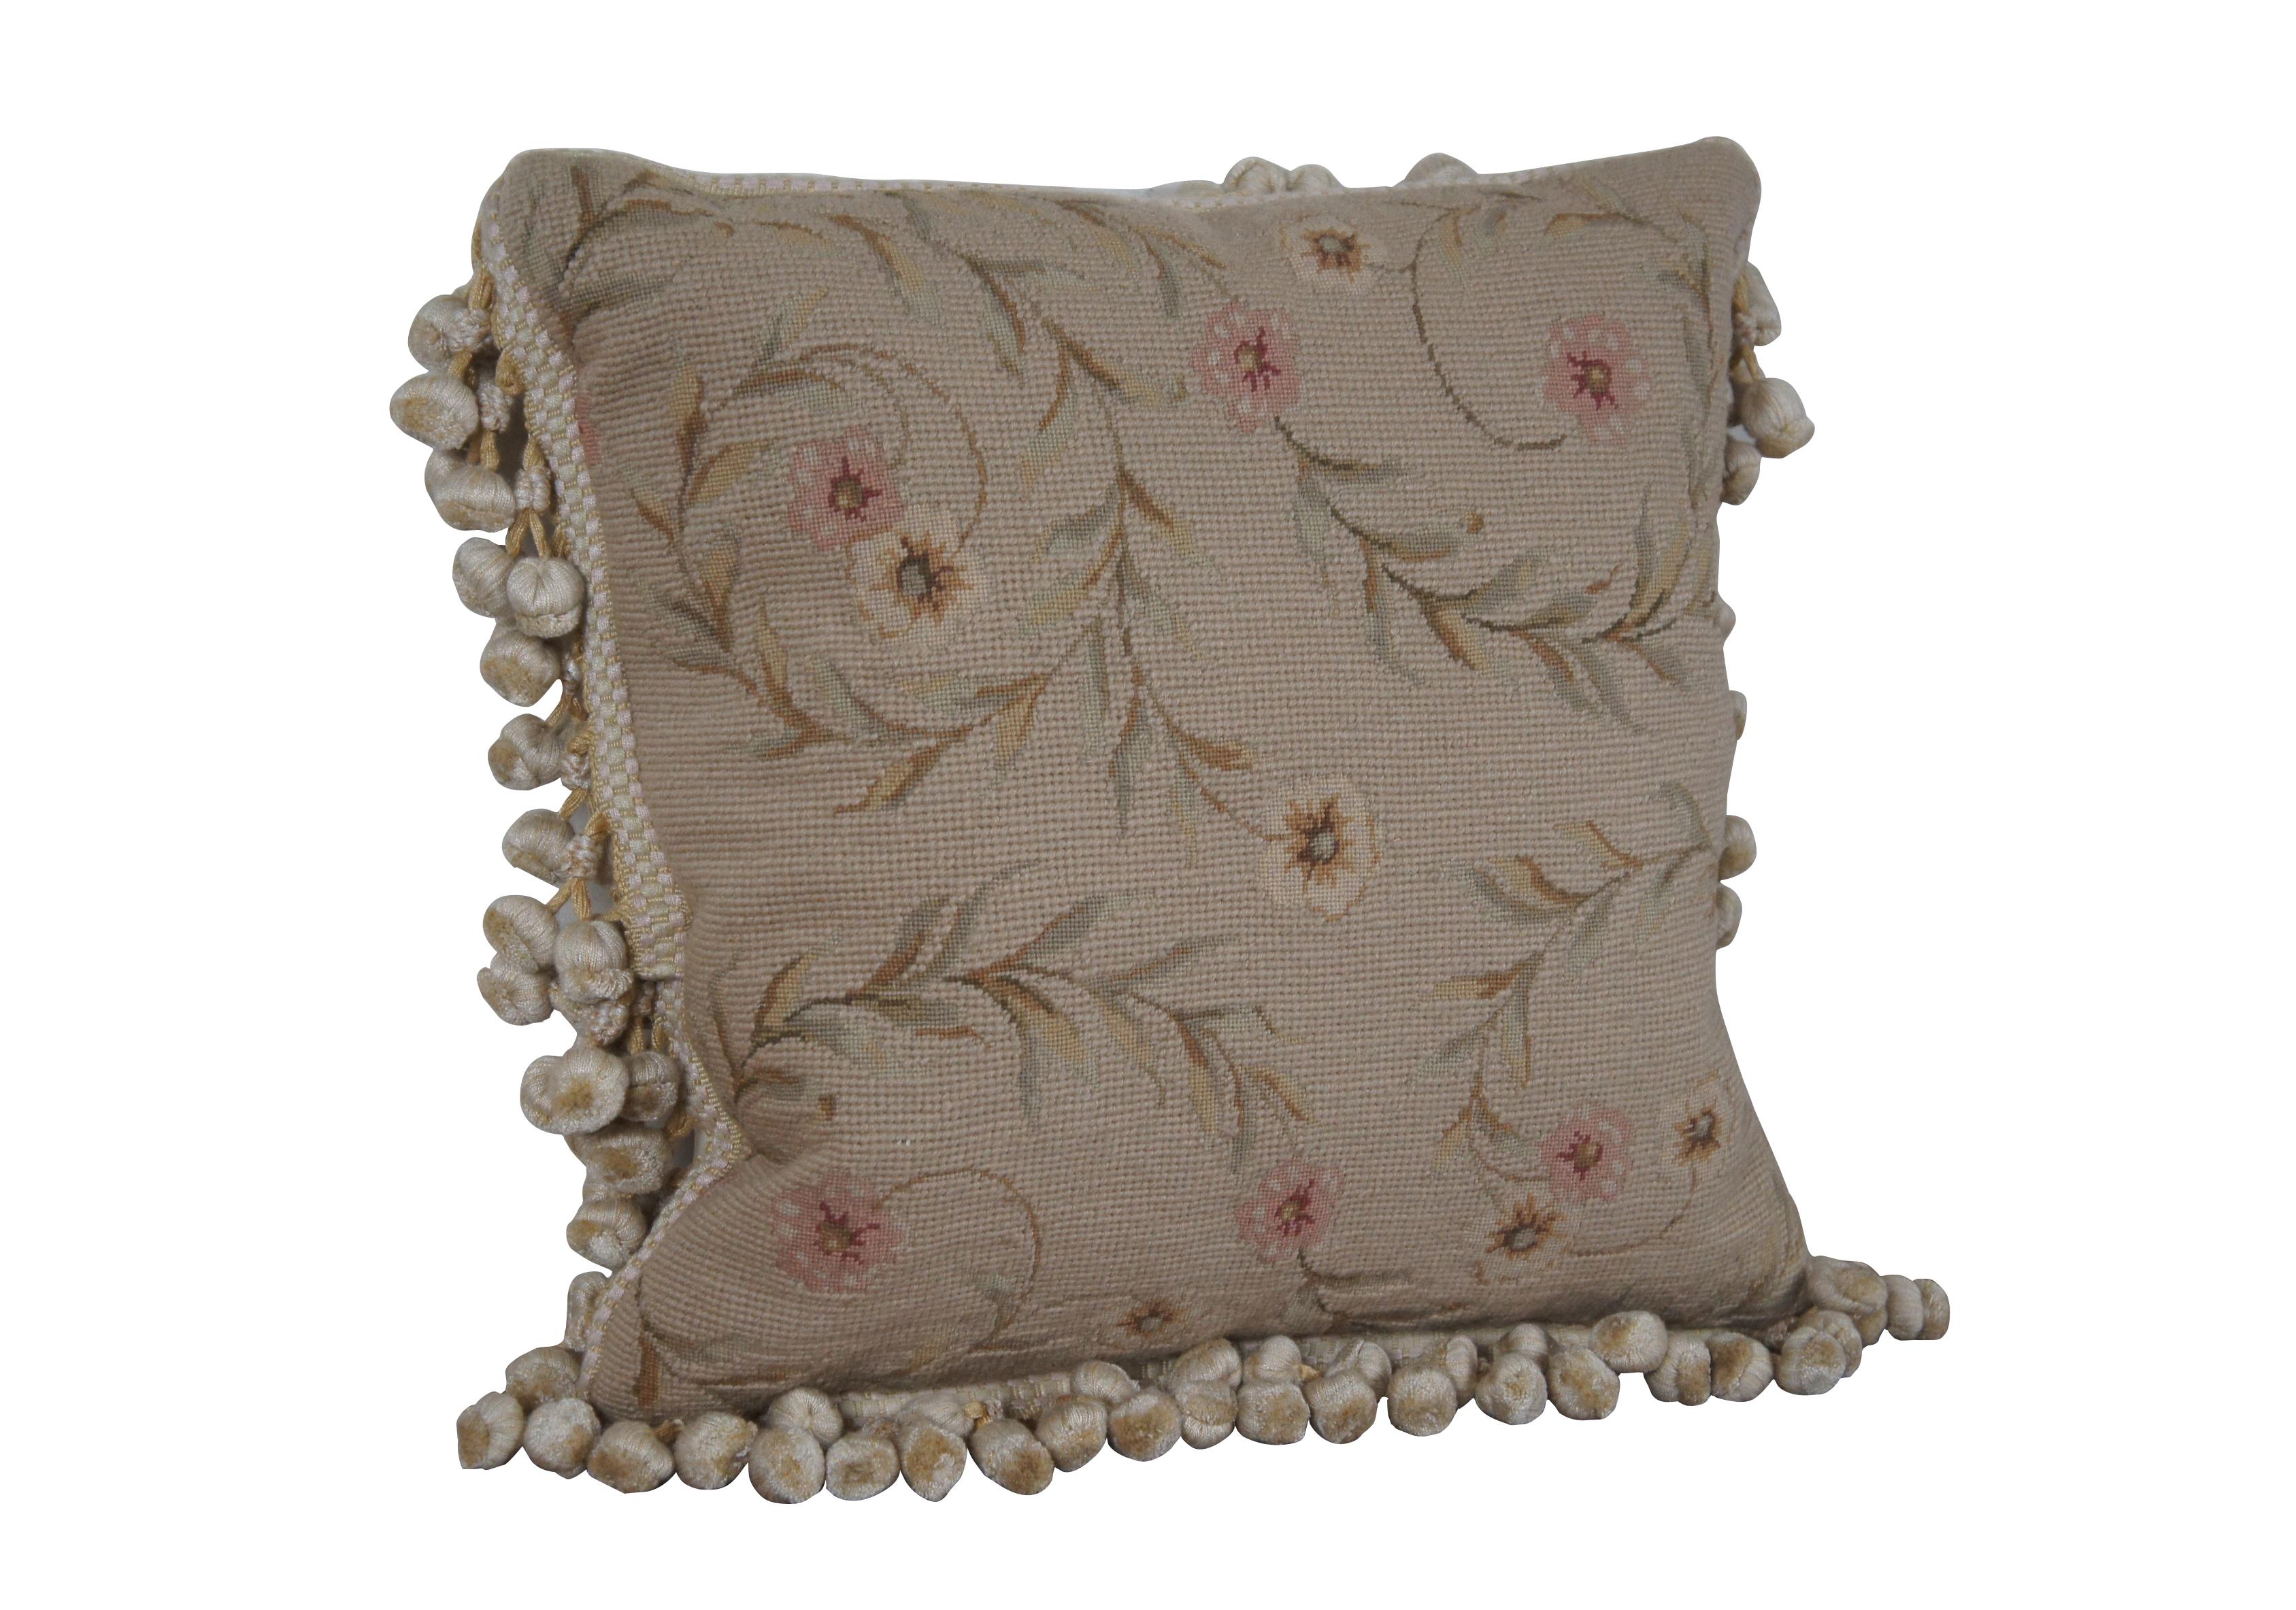 20th century square throw pillow, hand embroidered with pink and cream flowers on spiraling leafy stems, over a beige background. Cream and gold ball tassel trim. Cream velour back with zipper closure. Down filled.

Dimensions:
16